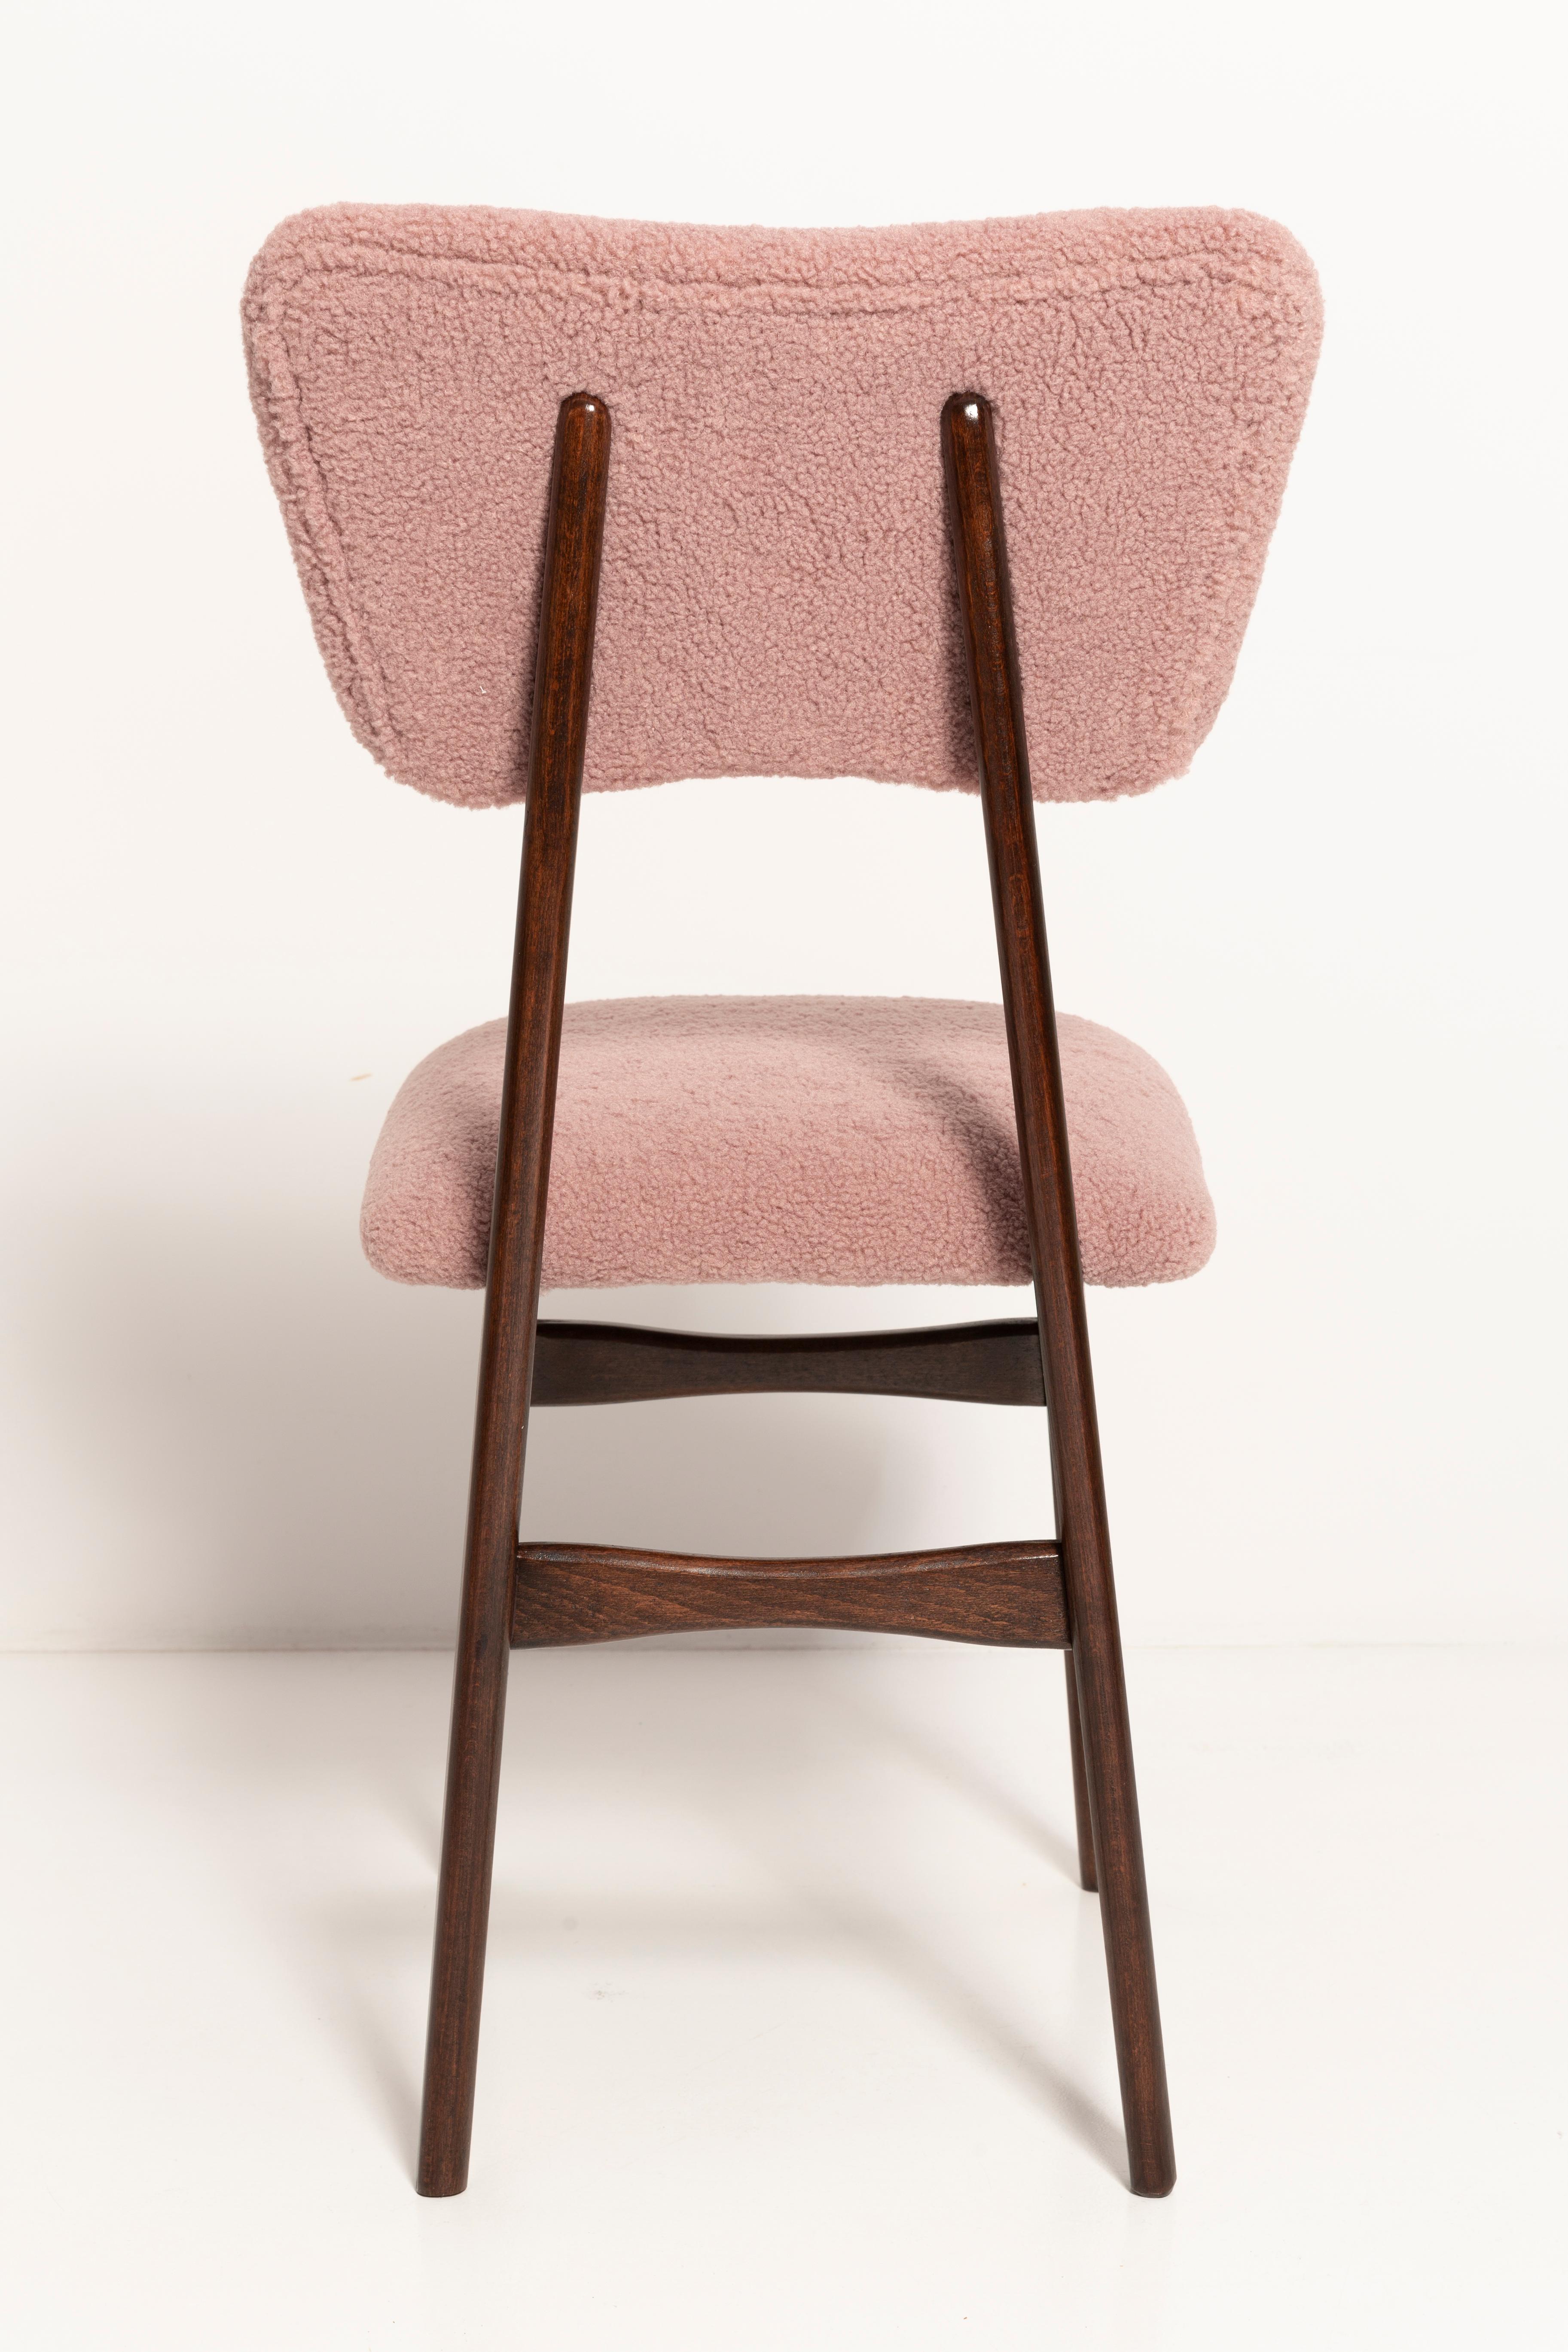 Set of Four Mid Century Butterfly Dining Chairs, Pink Boucle, Europe, 1960s For Sale 4